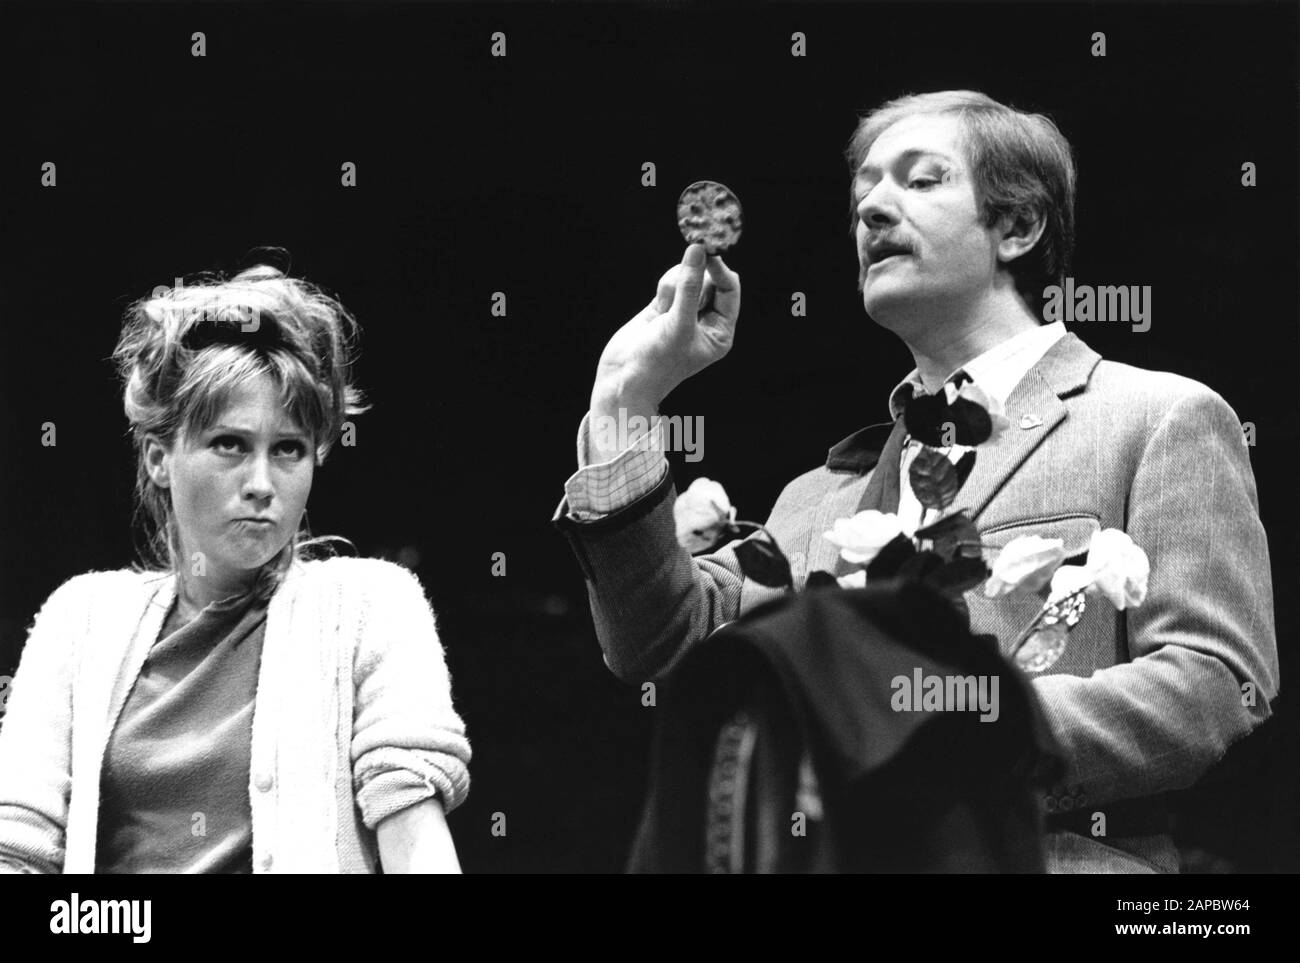 Felicity Kendal (Annie), Michael Gambon (Tom) in TABLE MANNERS by Alan Ayckbourn, part of his THE NORMAN CONQUESTS trilogy directed by Eric Thompson at the Globe Theatre, London W1 in 1974. Michael John Gambon, born in Cabra, Dublin in 1940, moved to London at the age of 6 and became a British citizen. Knighted in 1998. Multi-award-winner, including 3 Oliviers and 4 BAFTAs. Stock Photo